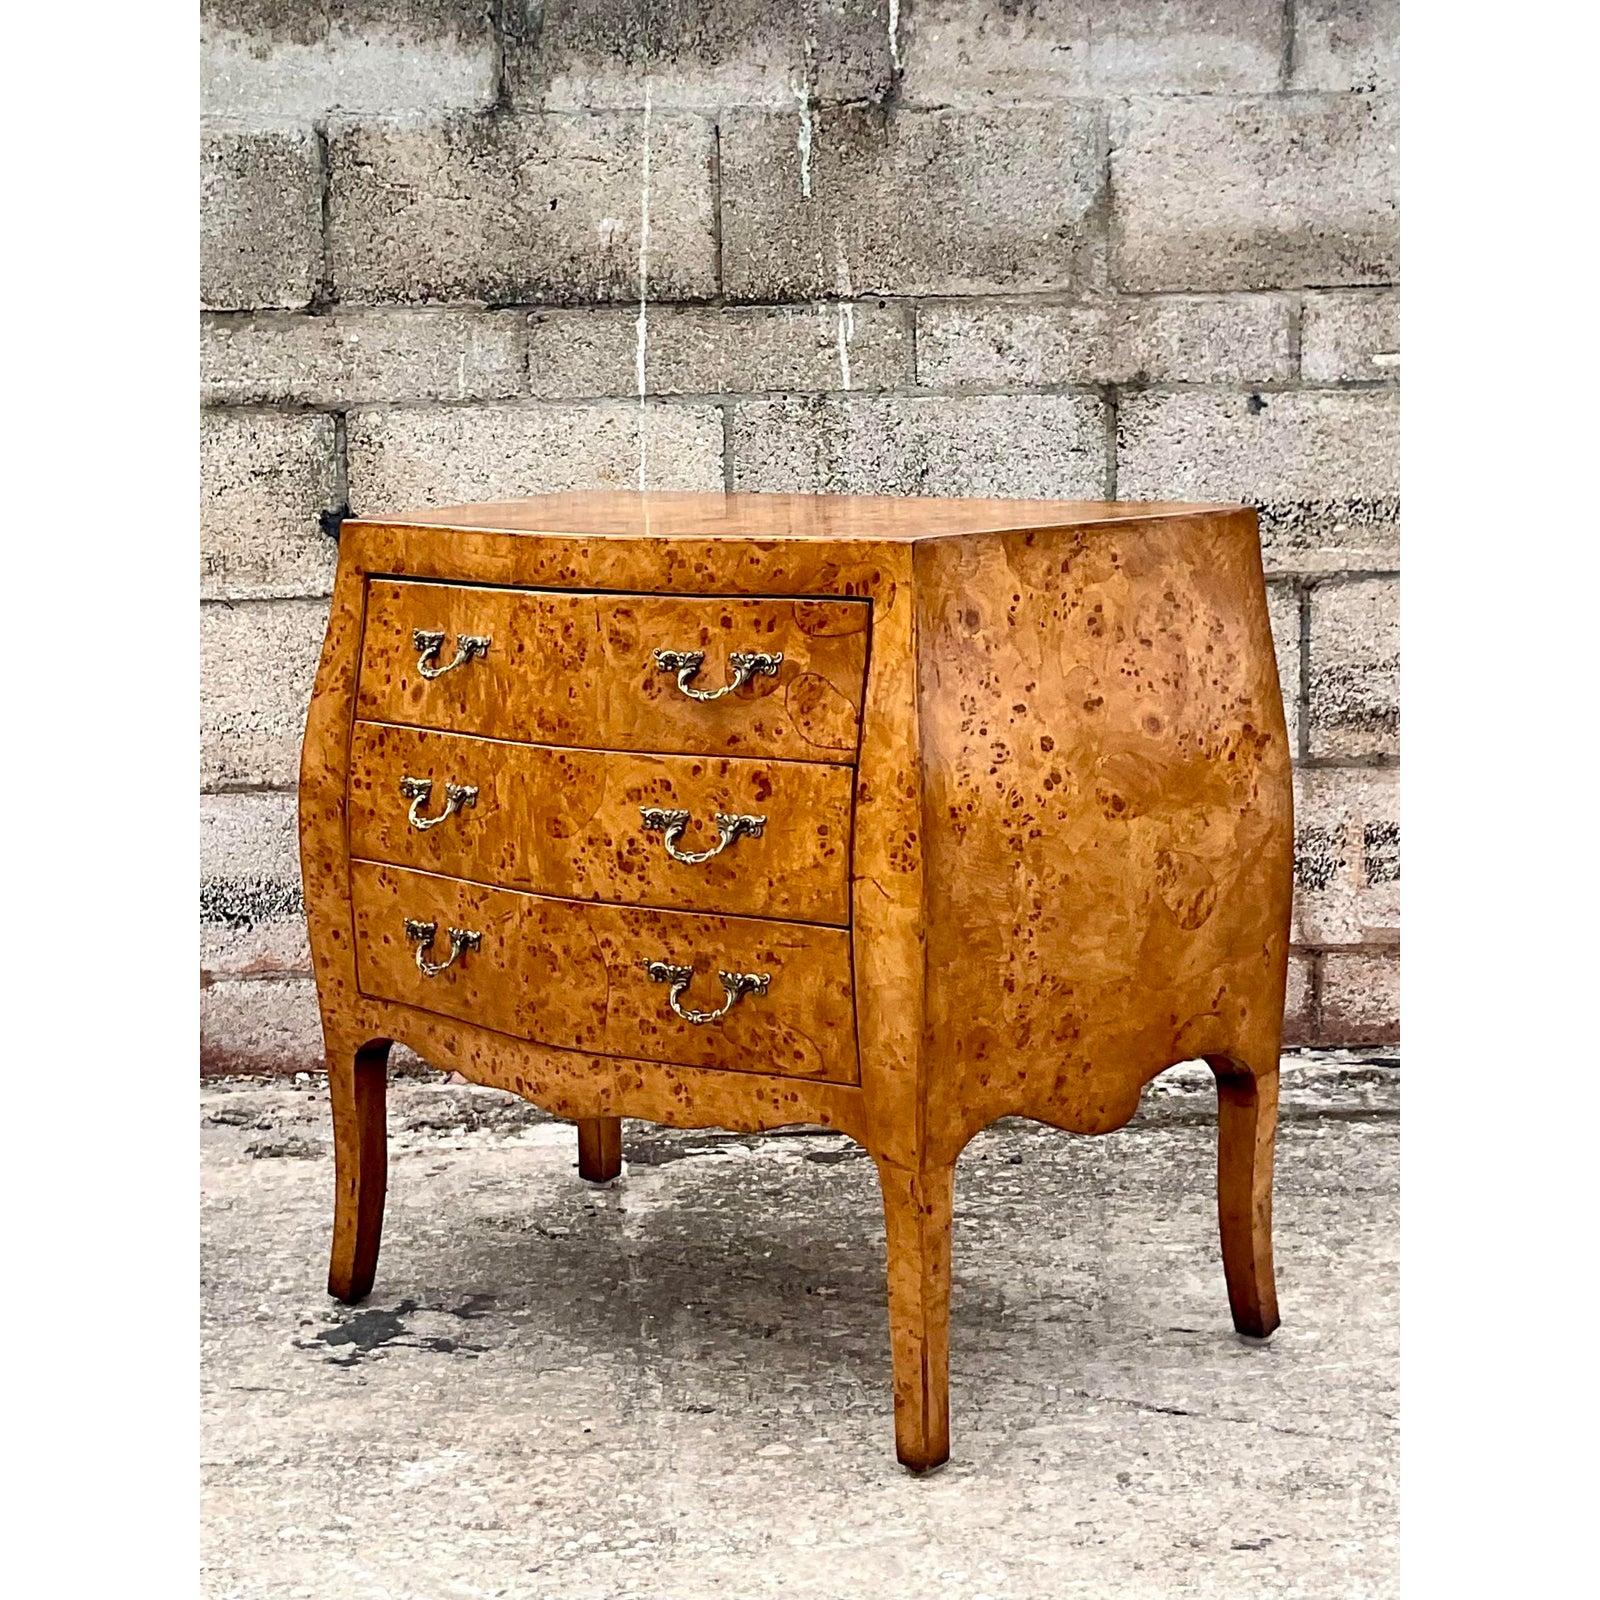 Incredible vintage William Switzer Regency commode. A gorgeous burl olive wood cabinet with lots of grain detail. Brass hardware pulls. Finished on the back so can sit comfortable with all sides exposed. Made in Italy. Acquired from a Palm Beach